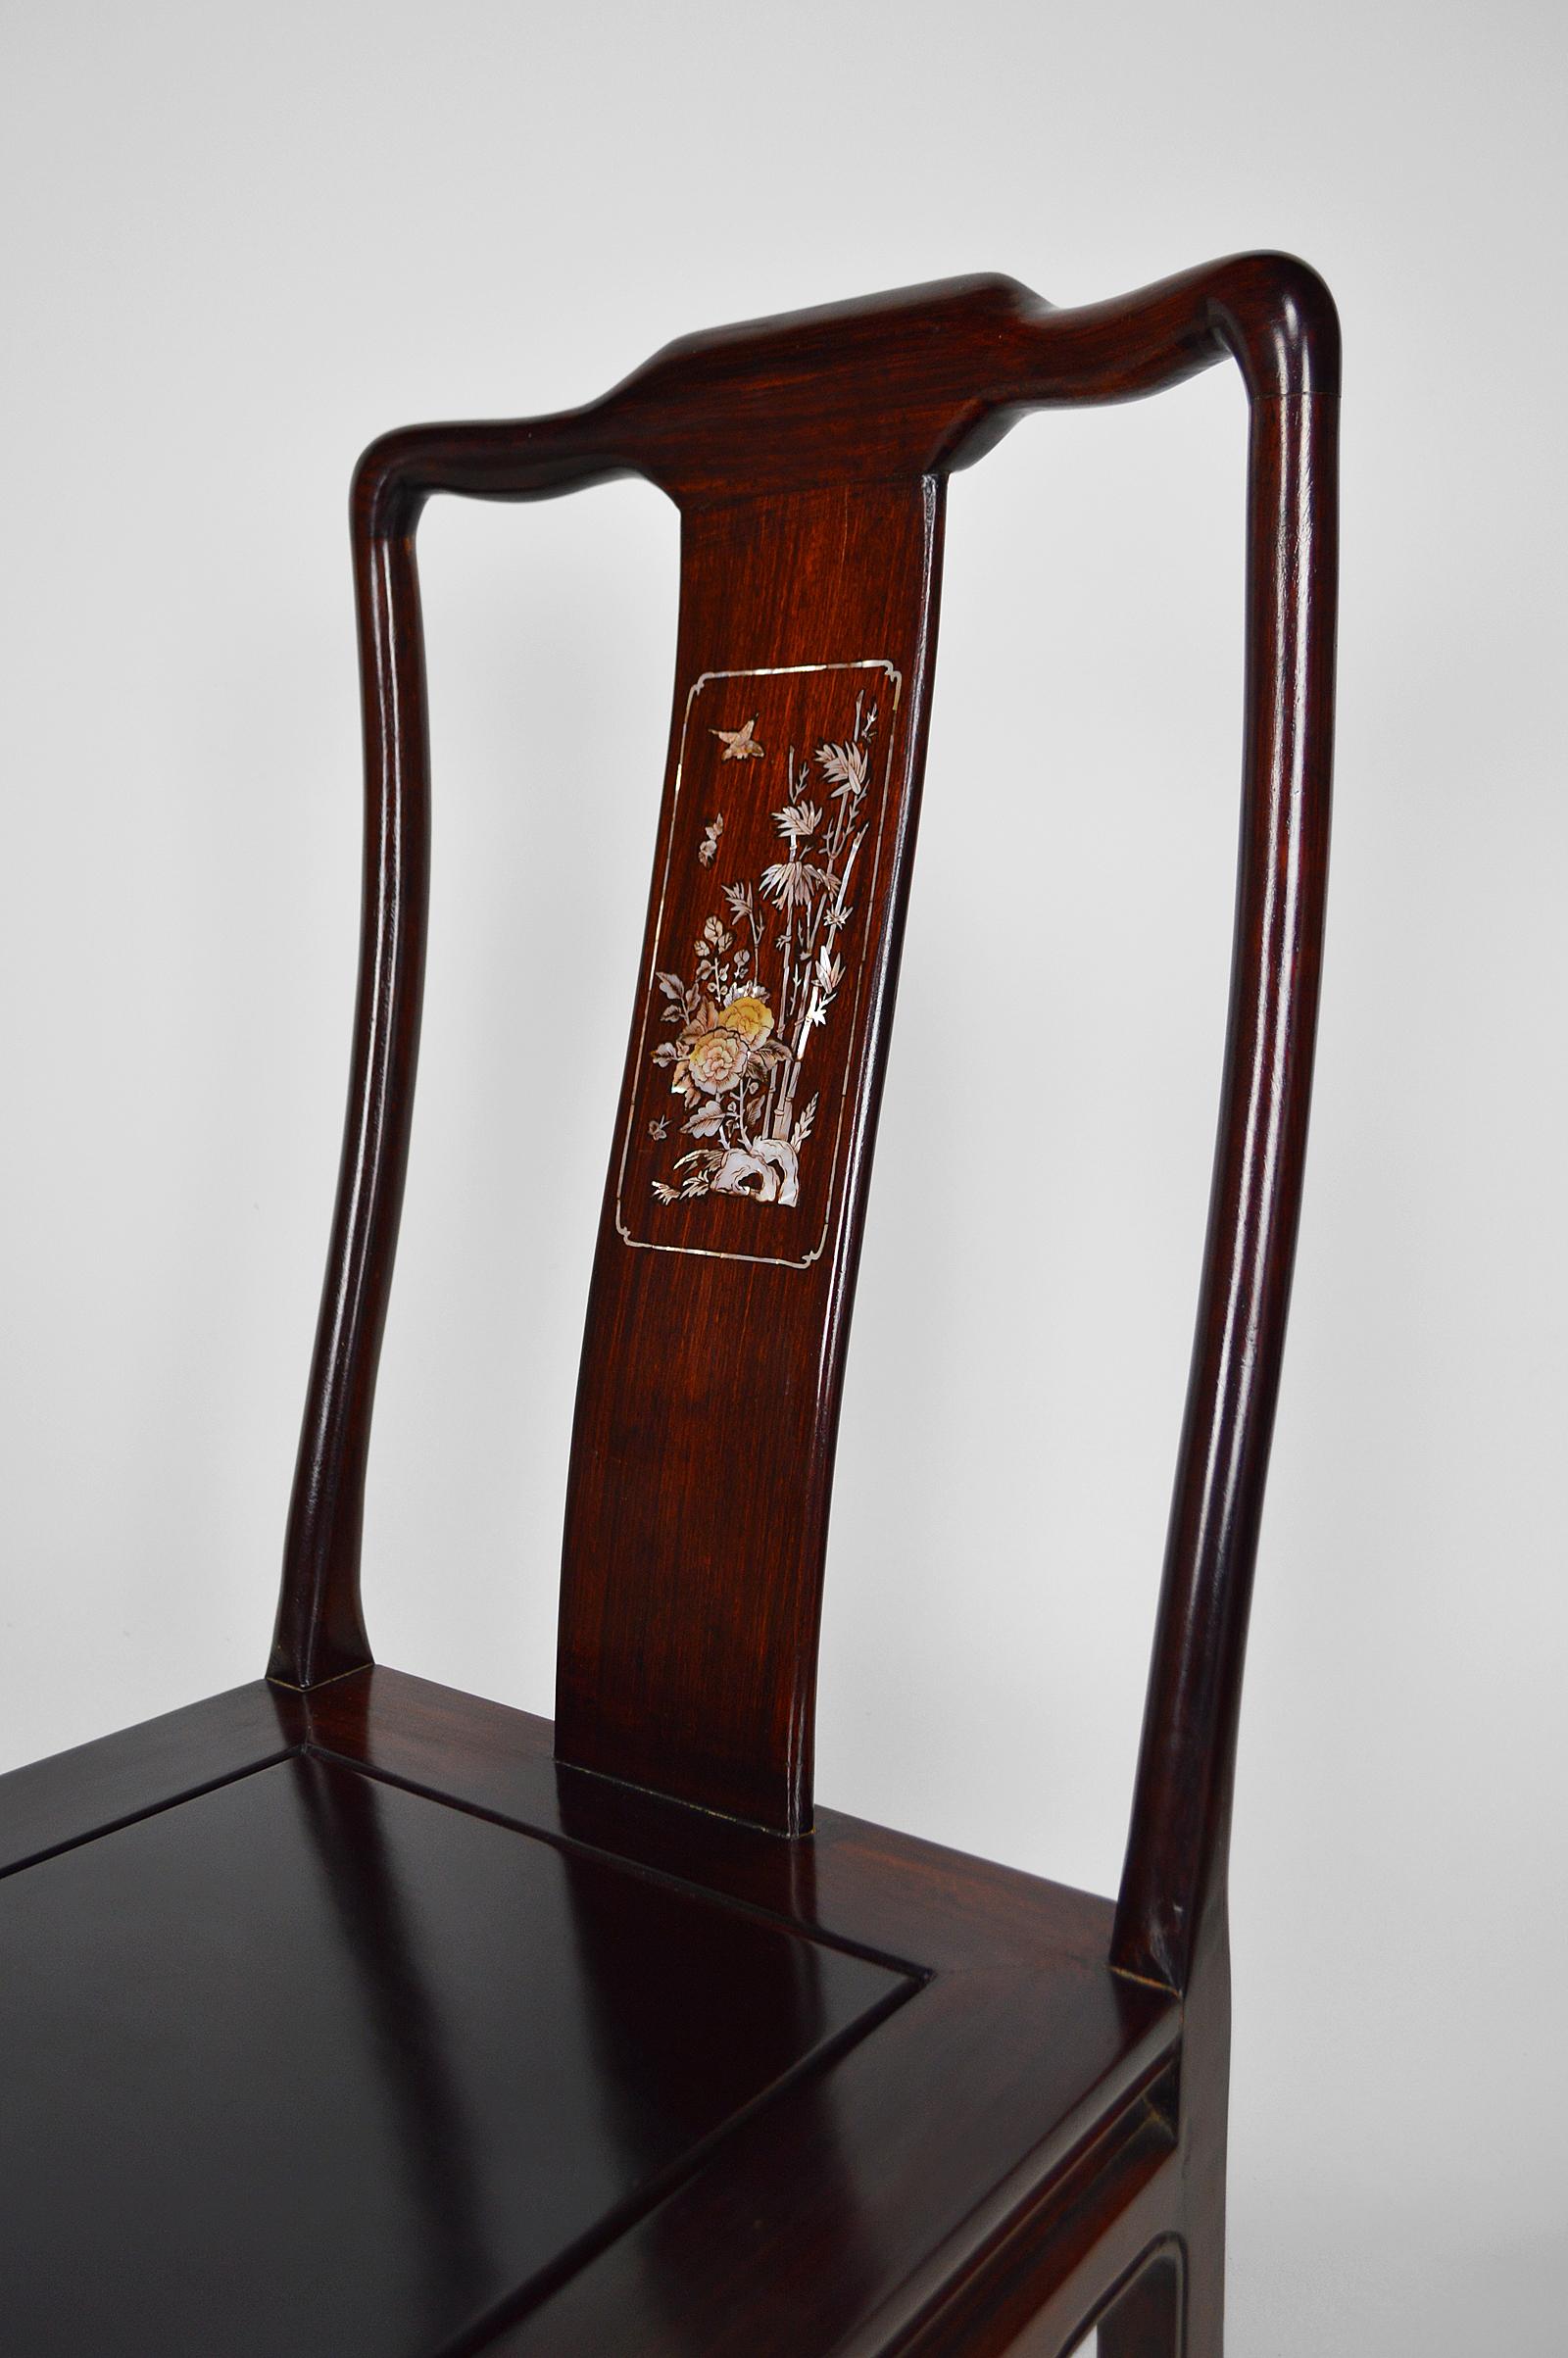 Set of 5 Asian Inlaid Wooden Chairs, Mid-20th Century 4